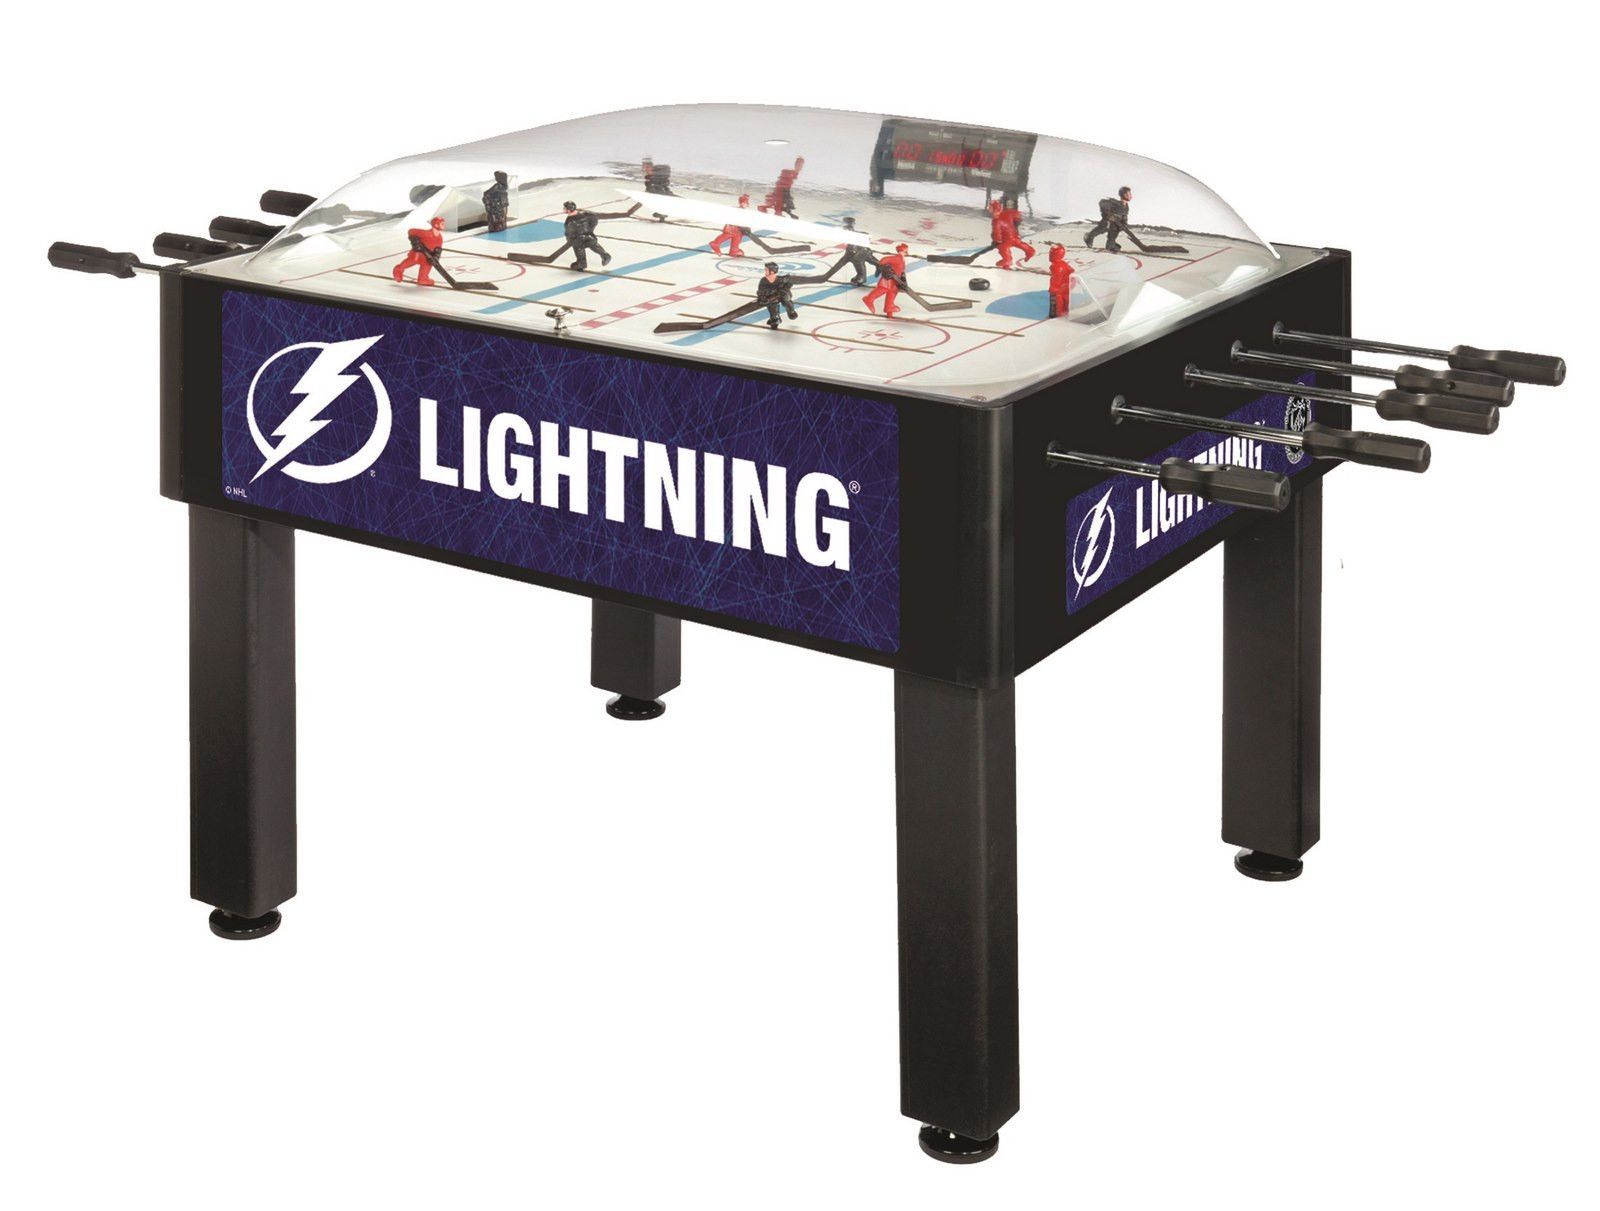 Dome hockey game table